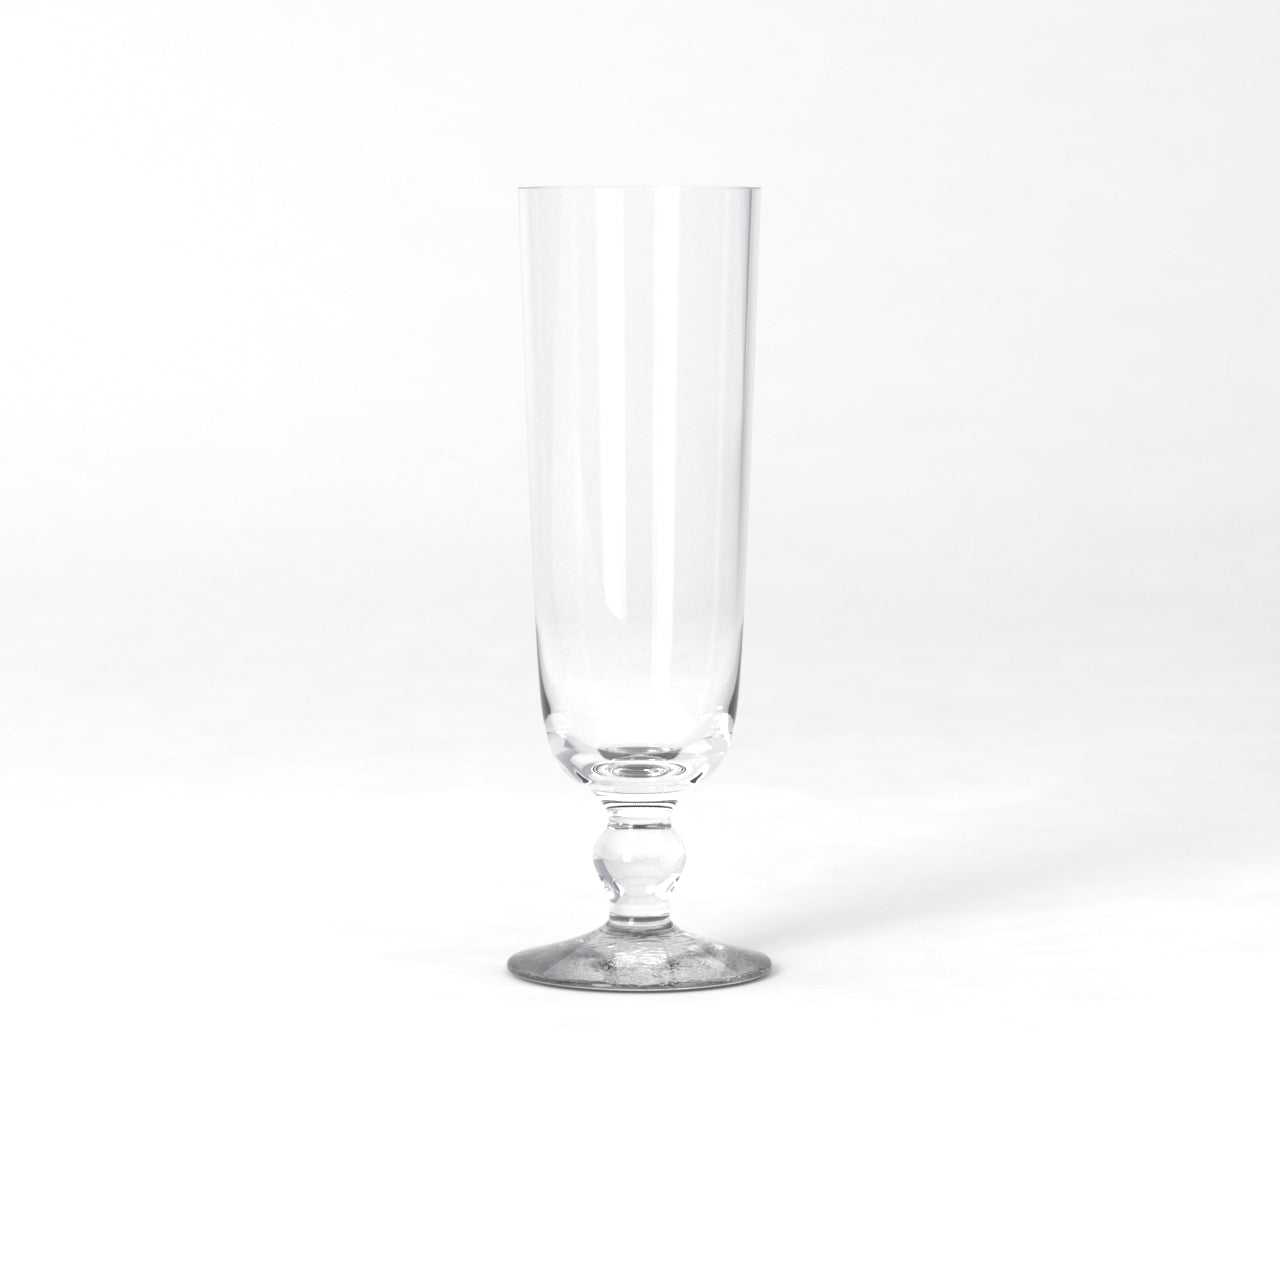 The brew glass